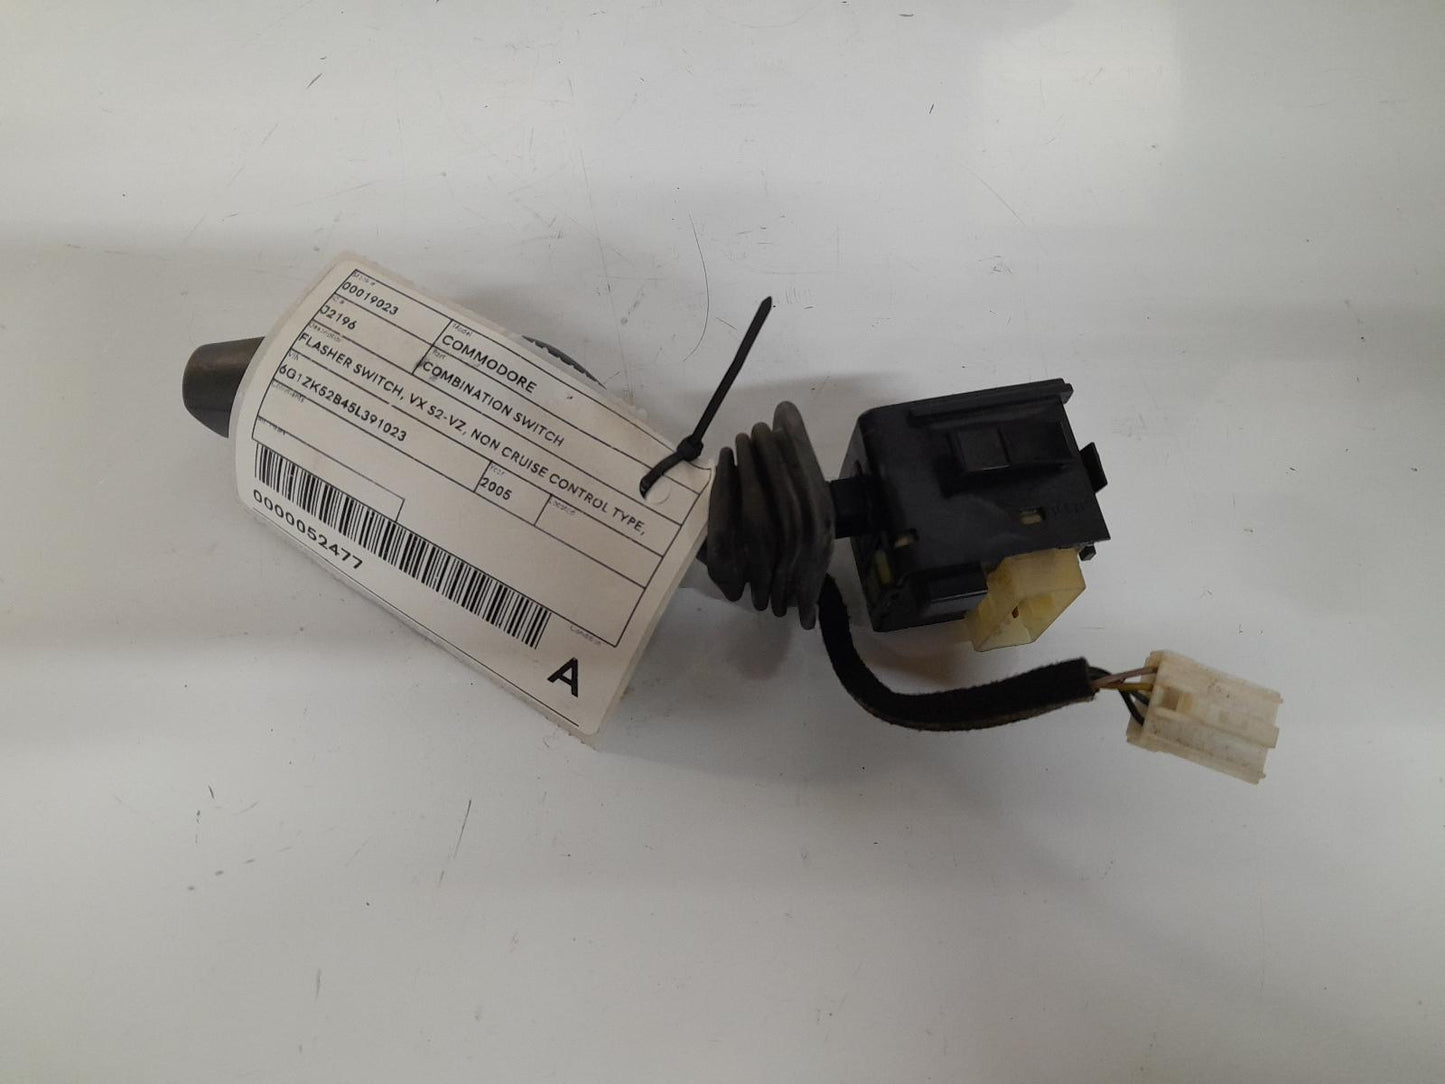 HOLDEN COMMODORE COMBINATION SWITCH FLASHER SWITCH, VX S2-VZ, NON CRUISE CONTROL TYPE, 09/01-09/07